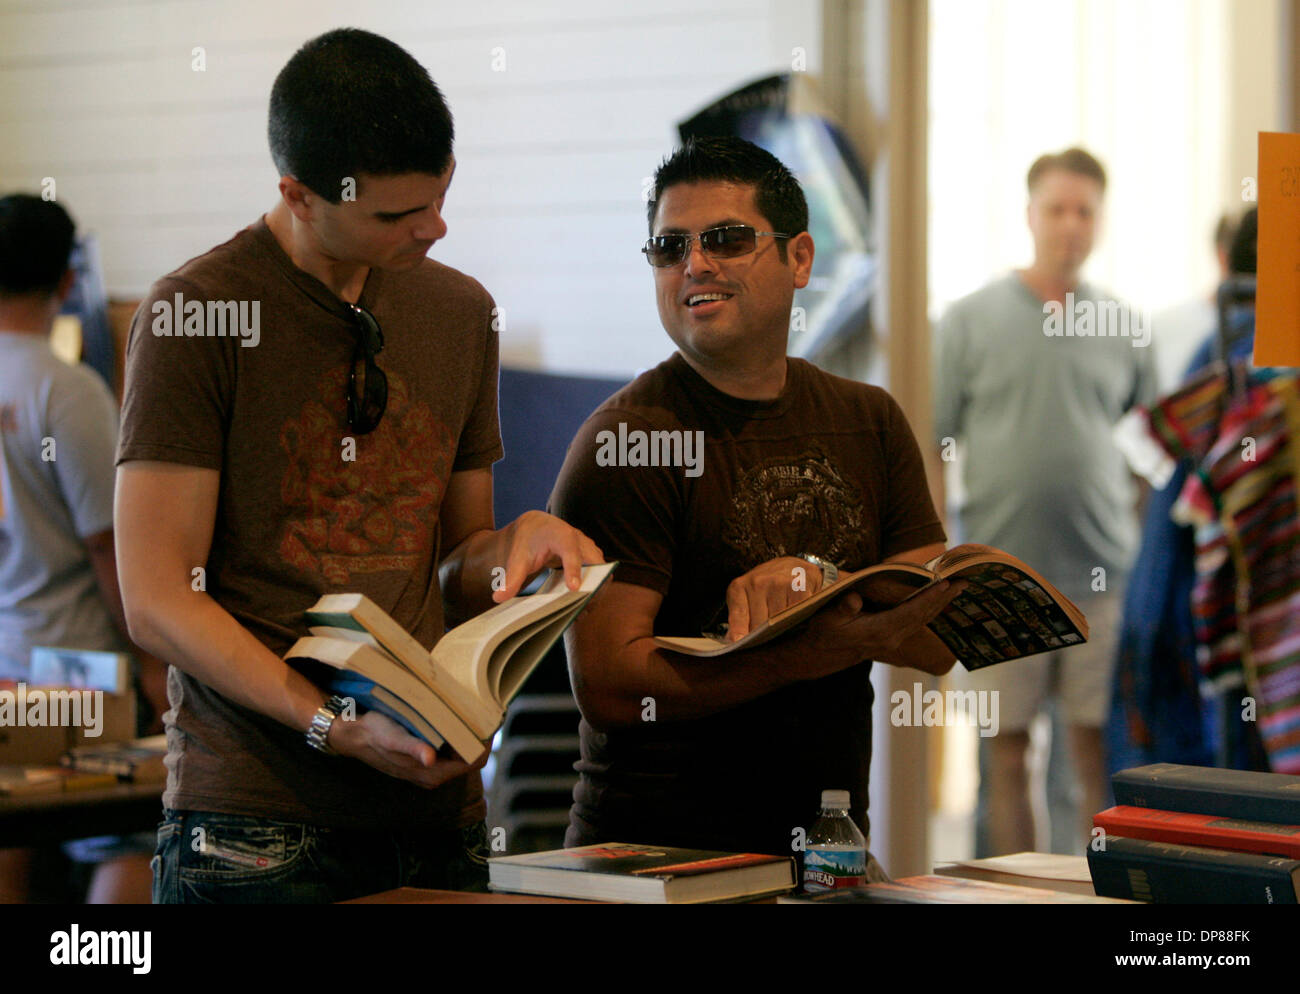 (Published 8/27/2006, B-5:R,C,CO)  August 26, 2006, San Diego, California ANDRE BEAUCHAMP, of Hillcrest, left, and RUBEN PACHECO, of North Park, right, laugh as they look through old books from a collection of items available for sale at the Museum of Man in San Diego's Balboa Park Saturday. Mandatory Credit photo by Laura Embry/San Diego Union-Tribune/Zuma Press, copyright 2006 Sa Stock Photo